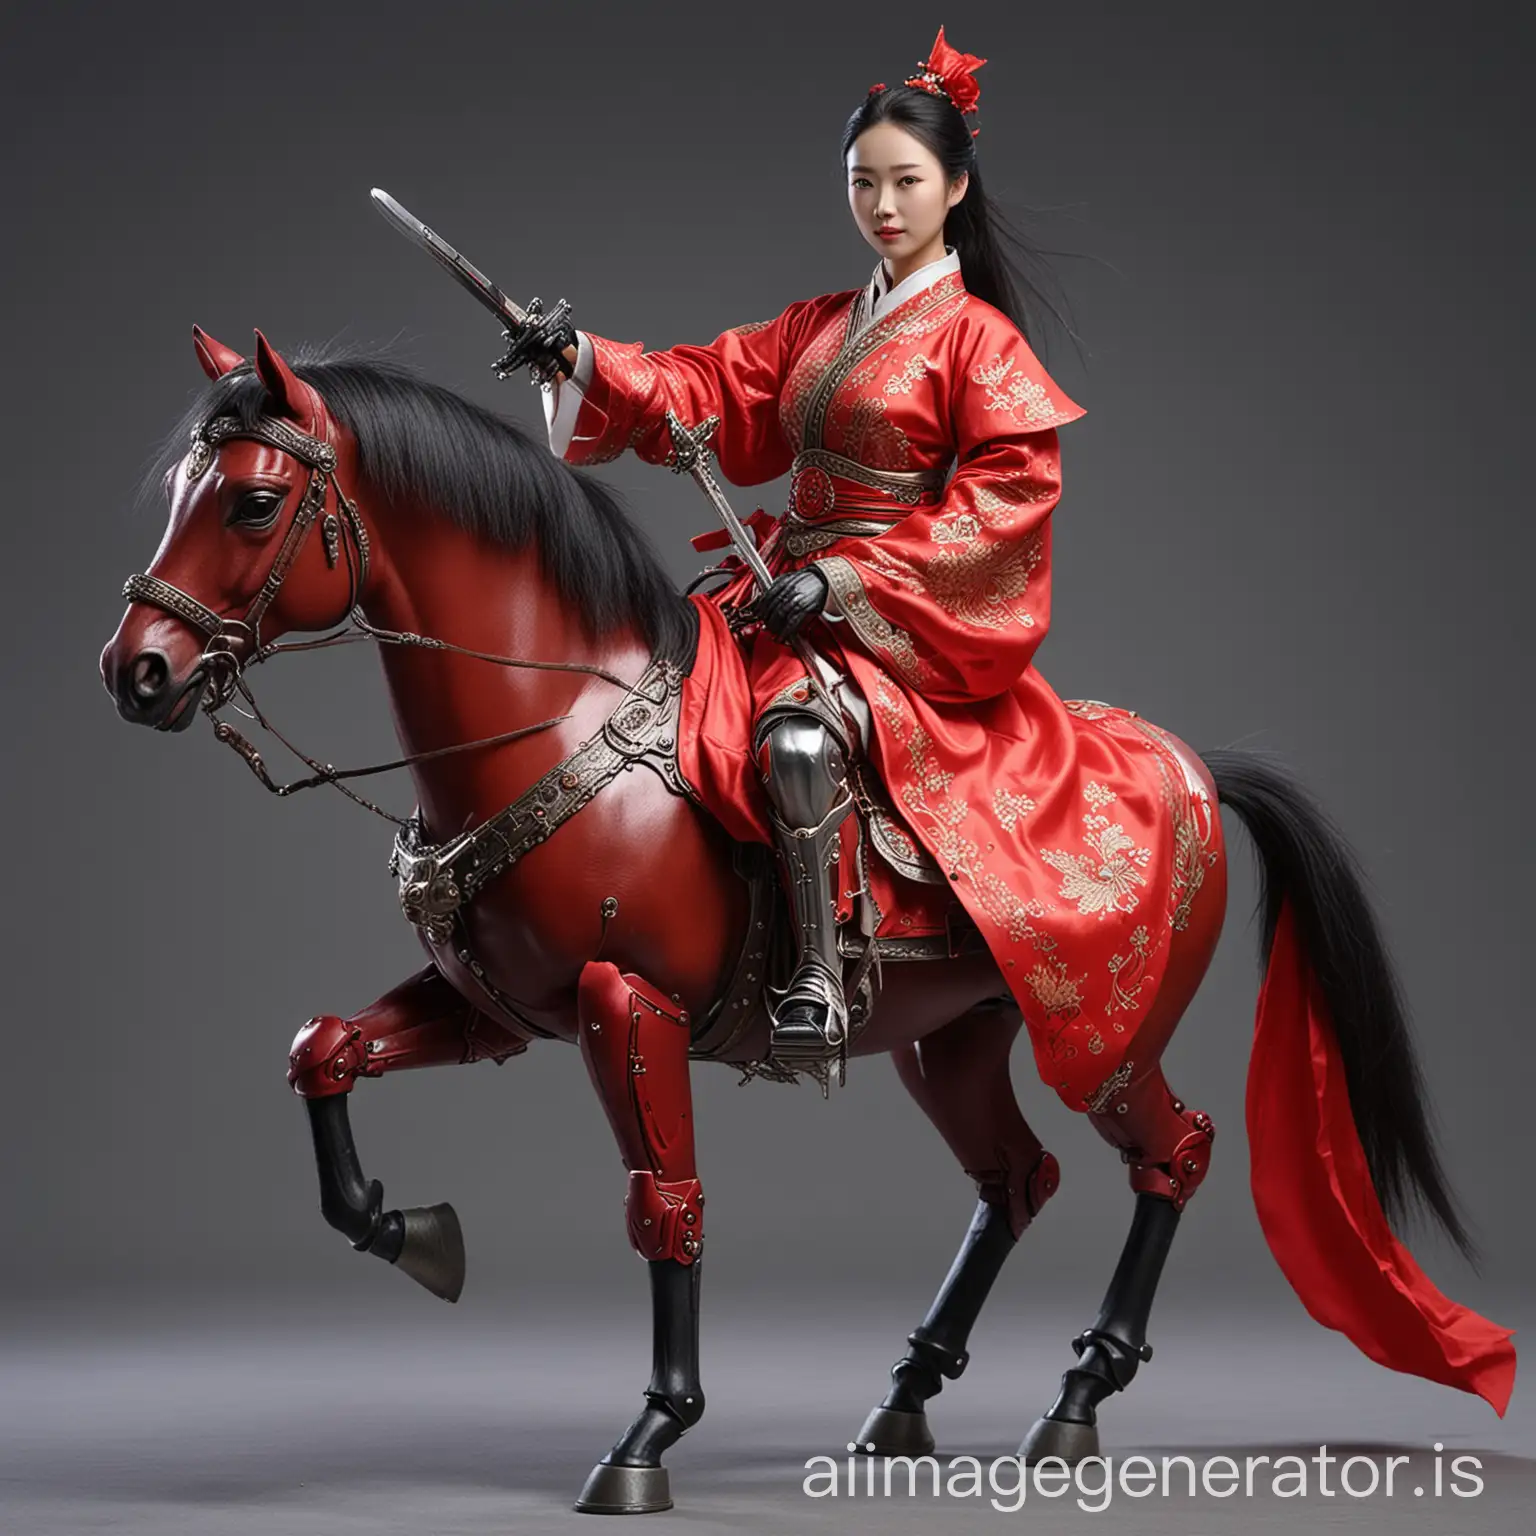 Chinese-Female-Robot-Riding-Horse-with-Sword